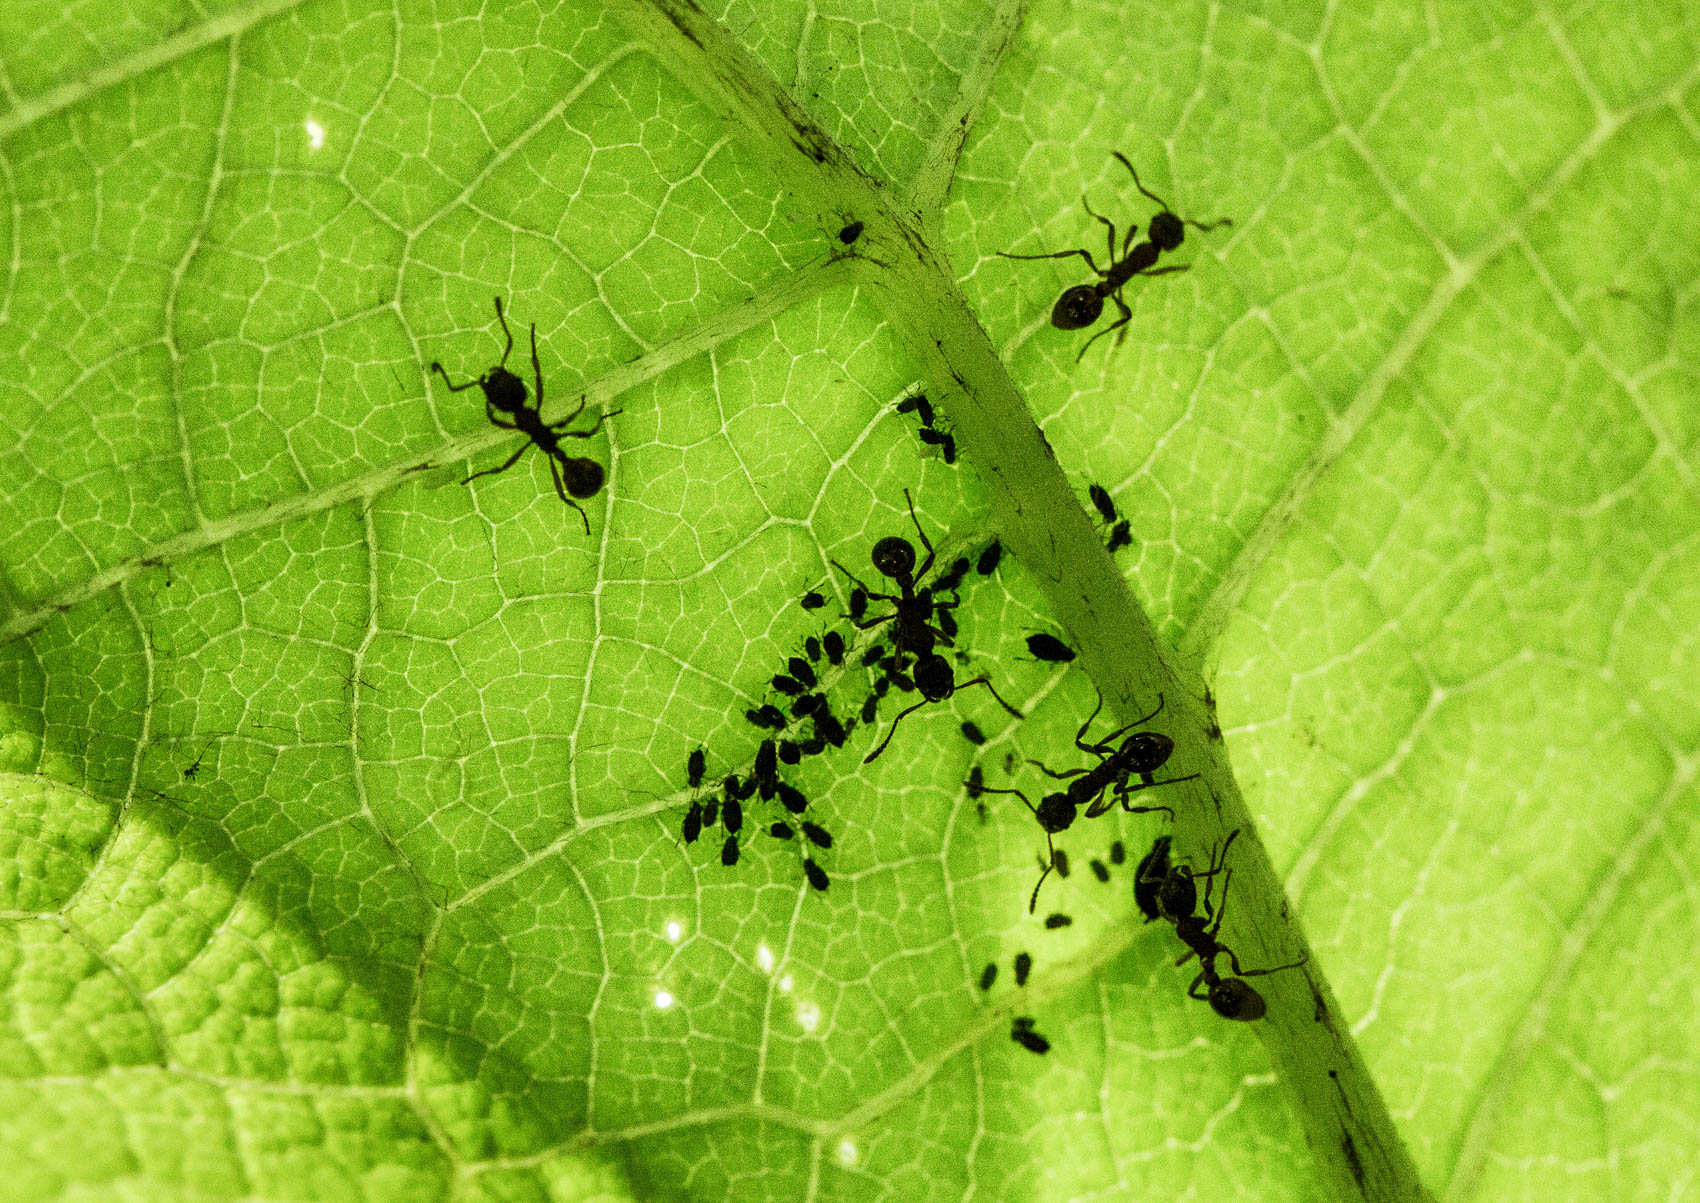 ants tending aphids